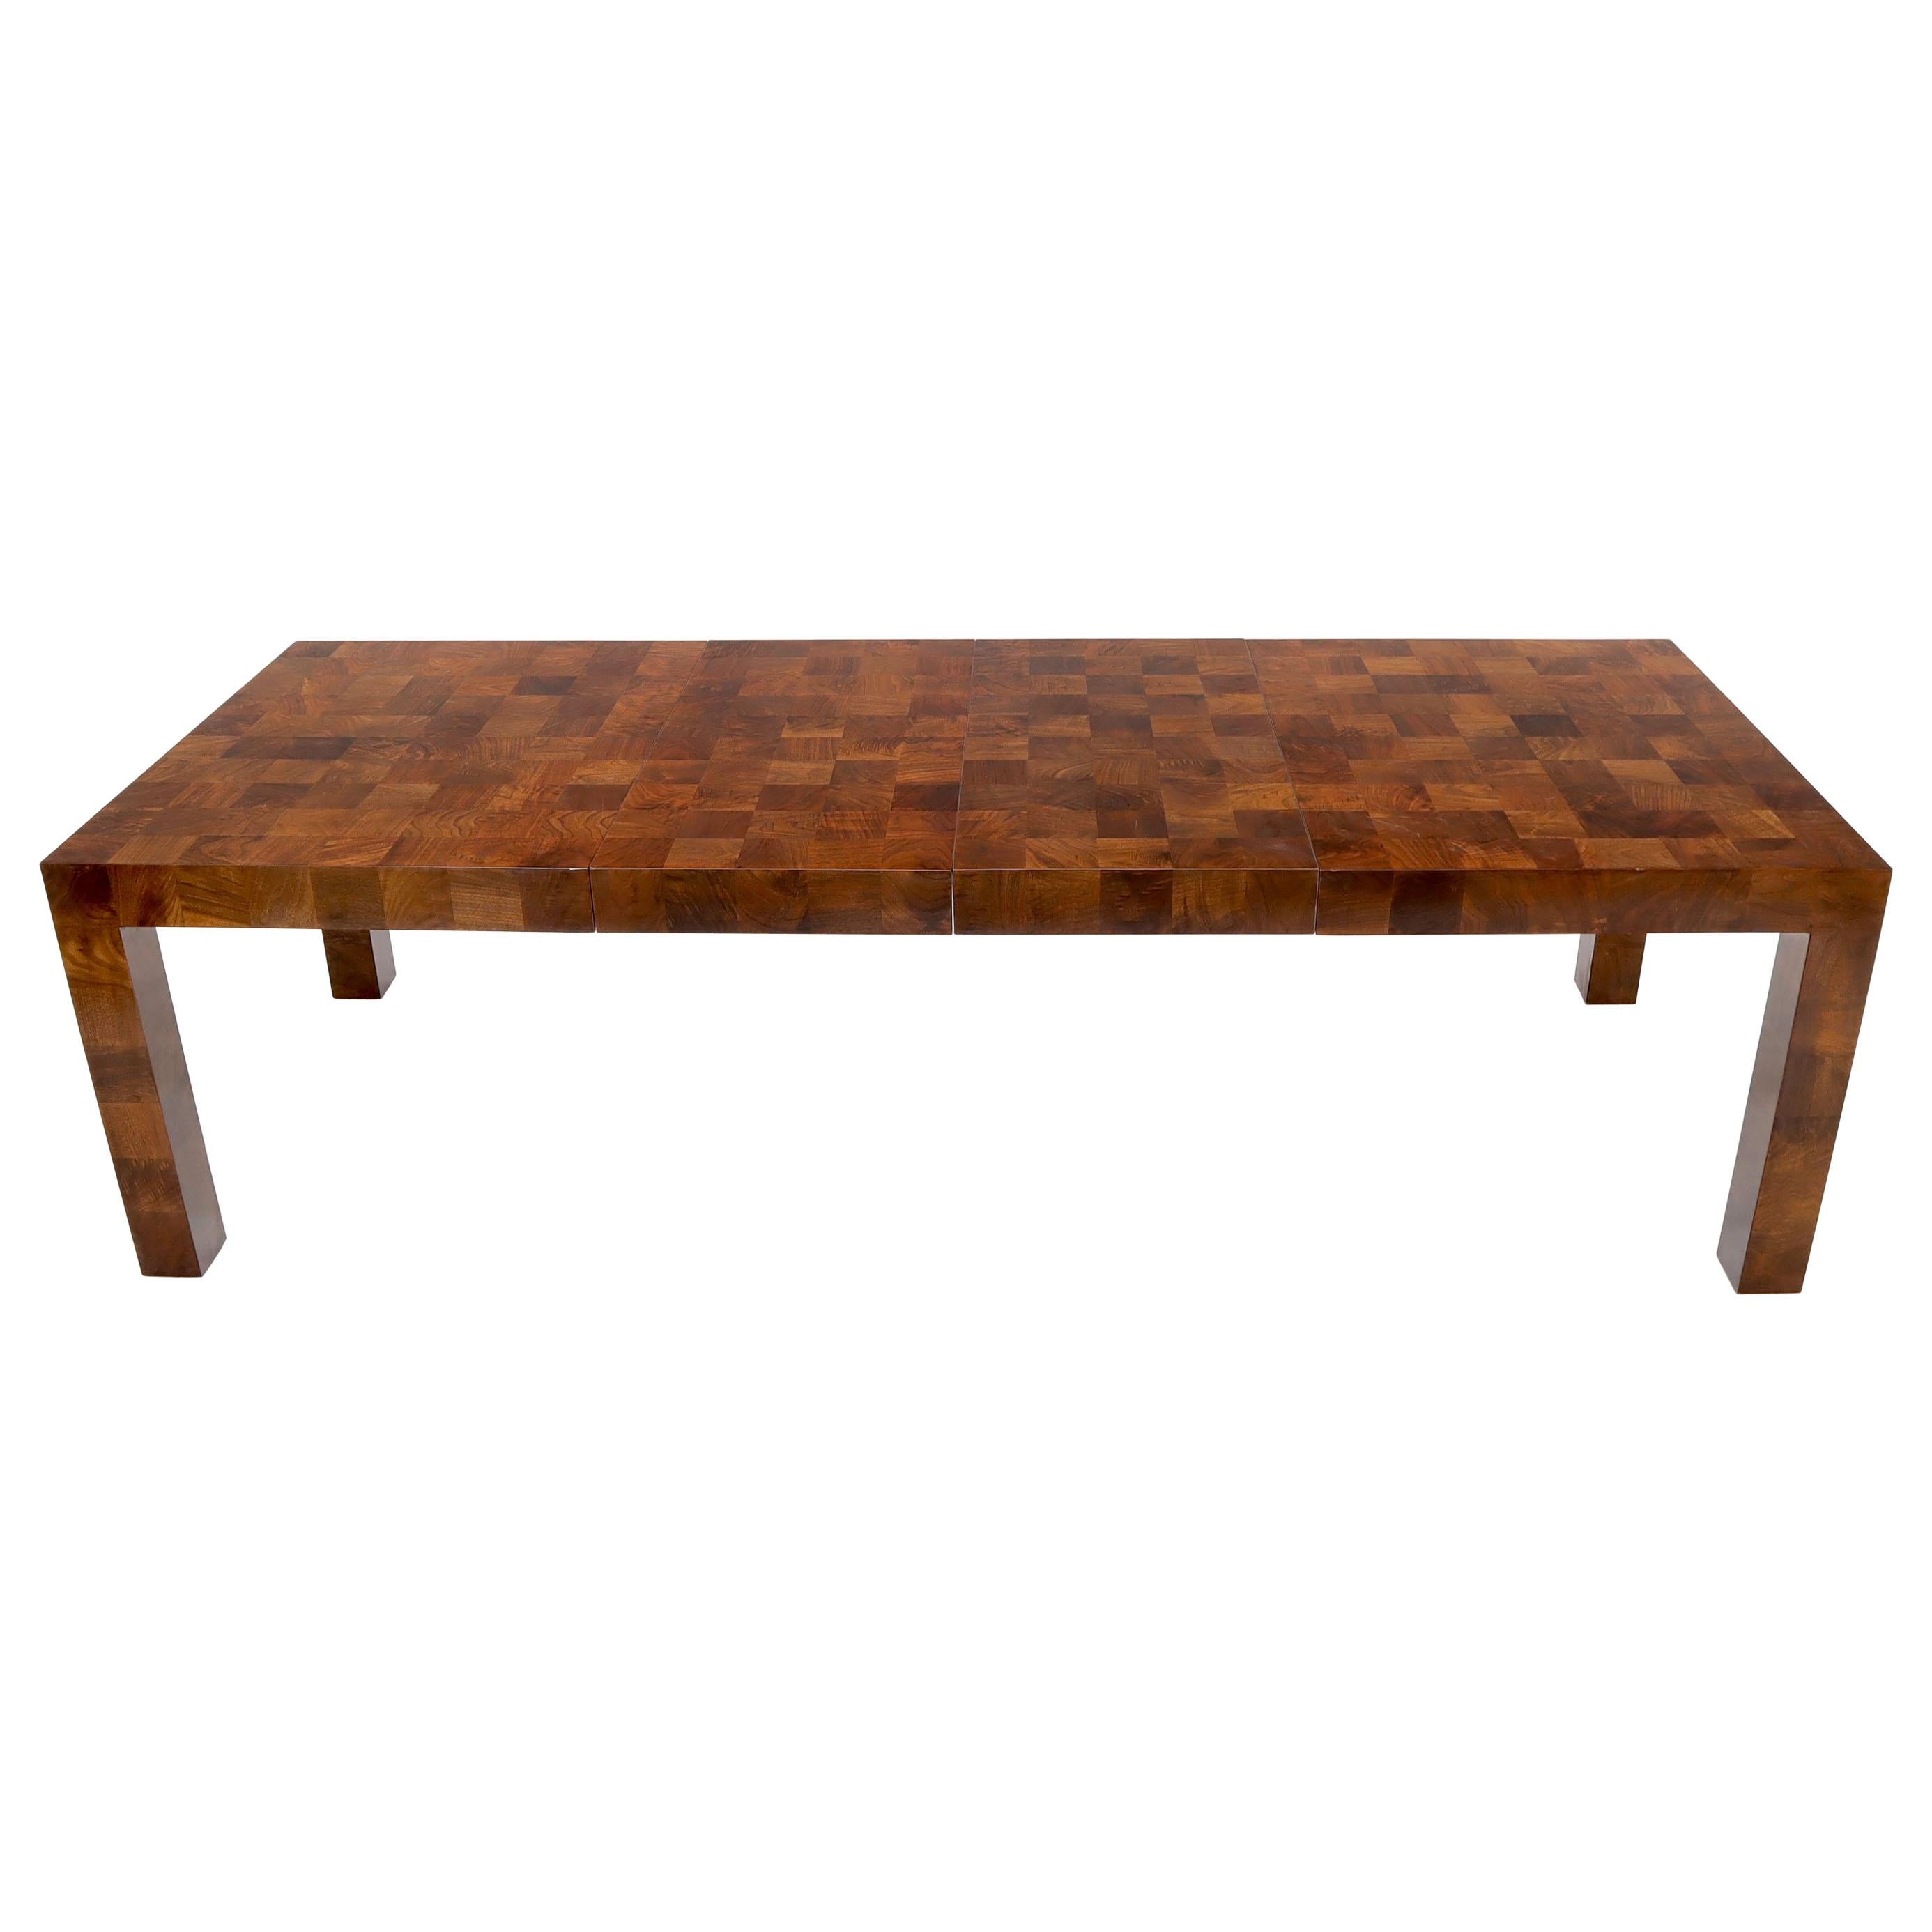 Burl Wood Square Patches Rectangle Dining Table with Two Extension Boards